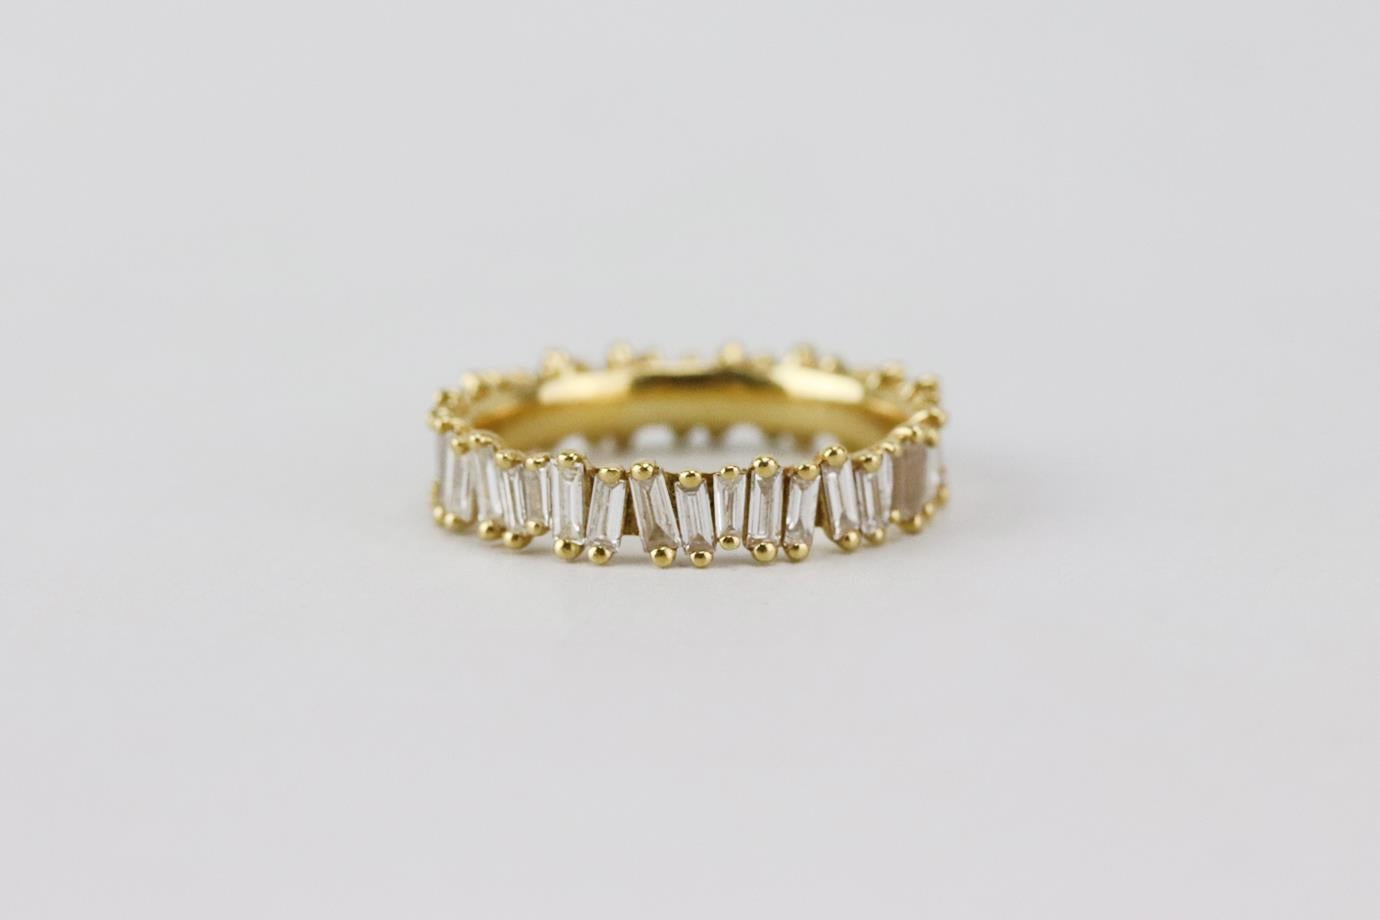 Suzanne Kalan Eternity Band 18k yellow gold and baguette diamond ring. Made from 18k yellow-gold with 40 baguette-diamonds weighing 1.60 cts. Yellow-gold. Does not come with box or dustbag. Ring Size: 16.5 mm. Width: 4 mm
